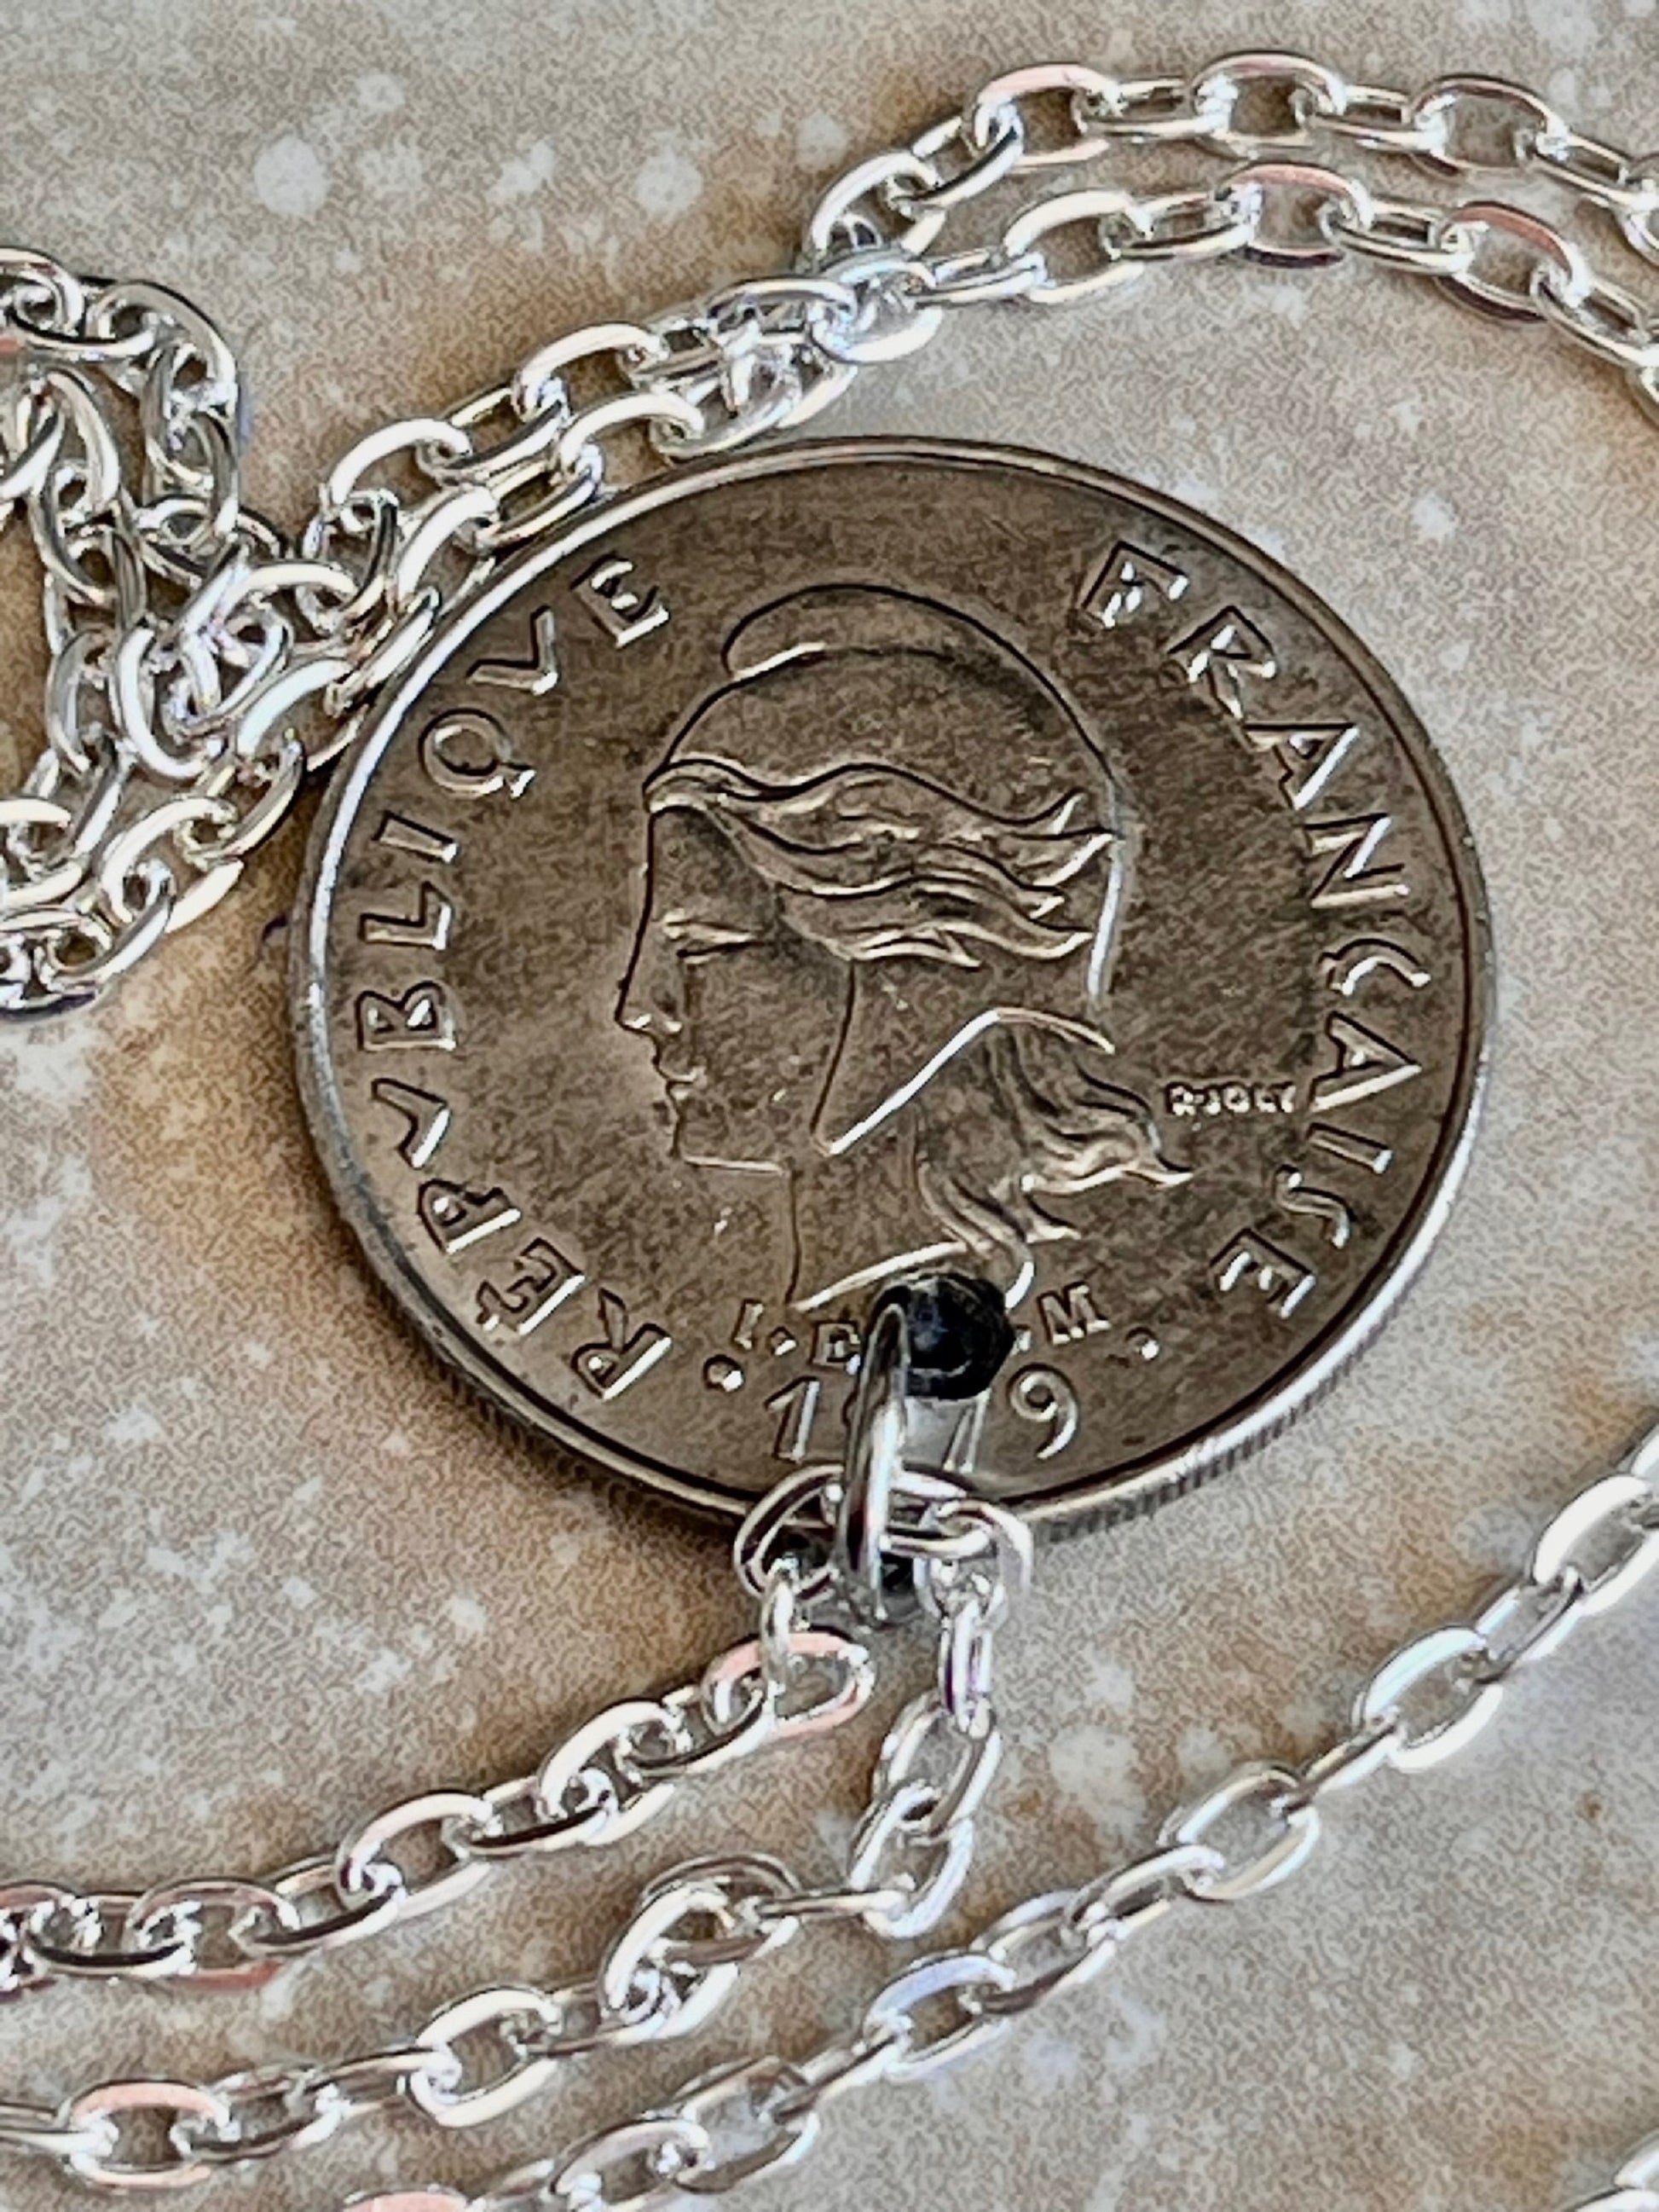 French Polynesia Coin Necklace 20 Francs Handmade Custom Made Charm Gift For Friend Coin Charm Gift For Him, Coin Collector, World Coins